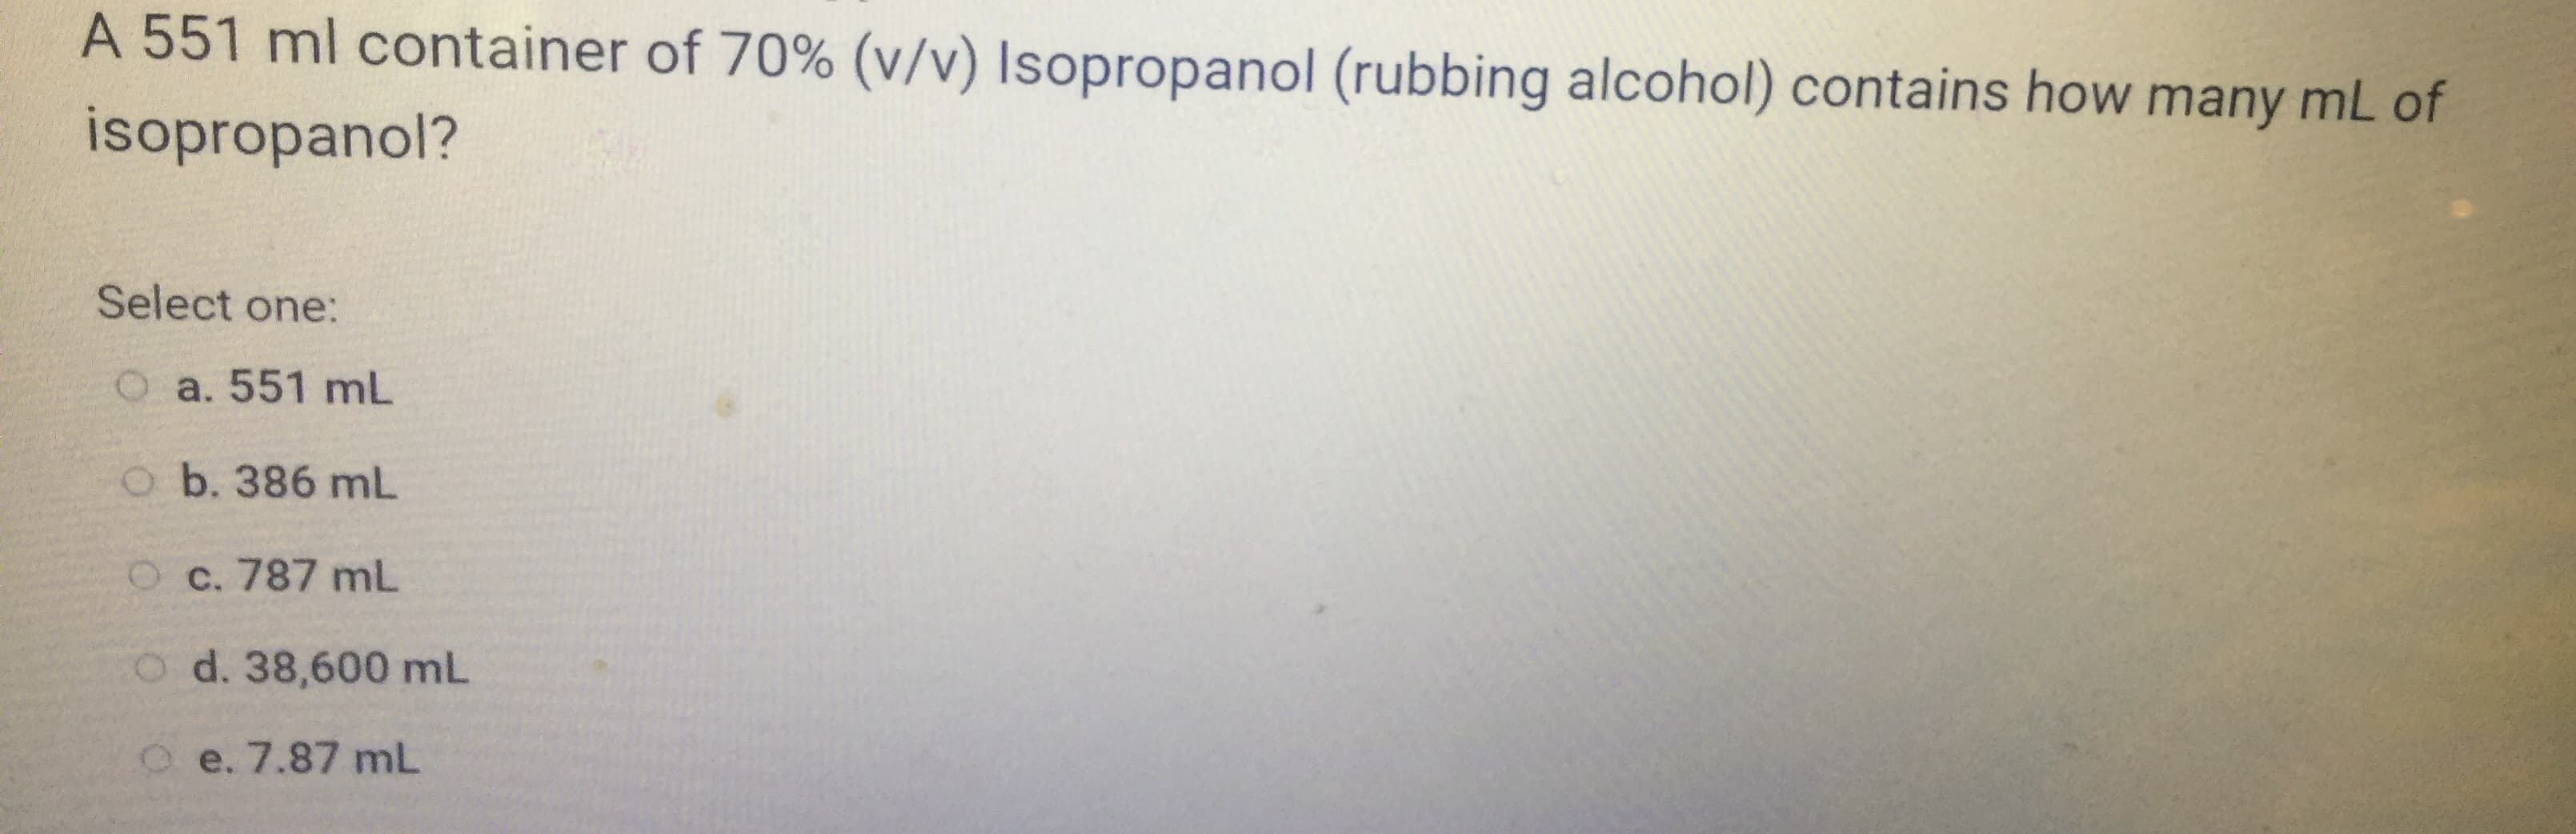 A 551 ml container of 70% (v/v) Isopropanol (rubbing alcohol) contains how many mL of
isopropanol?
Select one:
O a. 551 mL
o b. 386 mL
O c. 787 mL
CO d. 38,600 mL
O e. 7.87 mL
